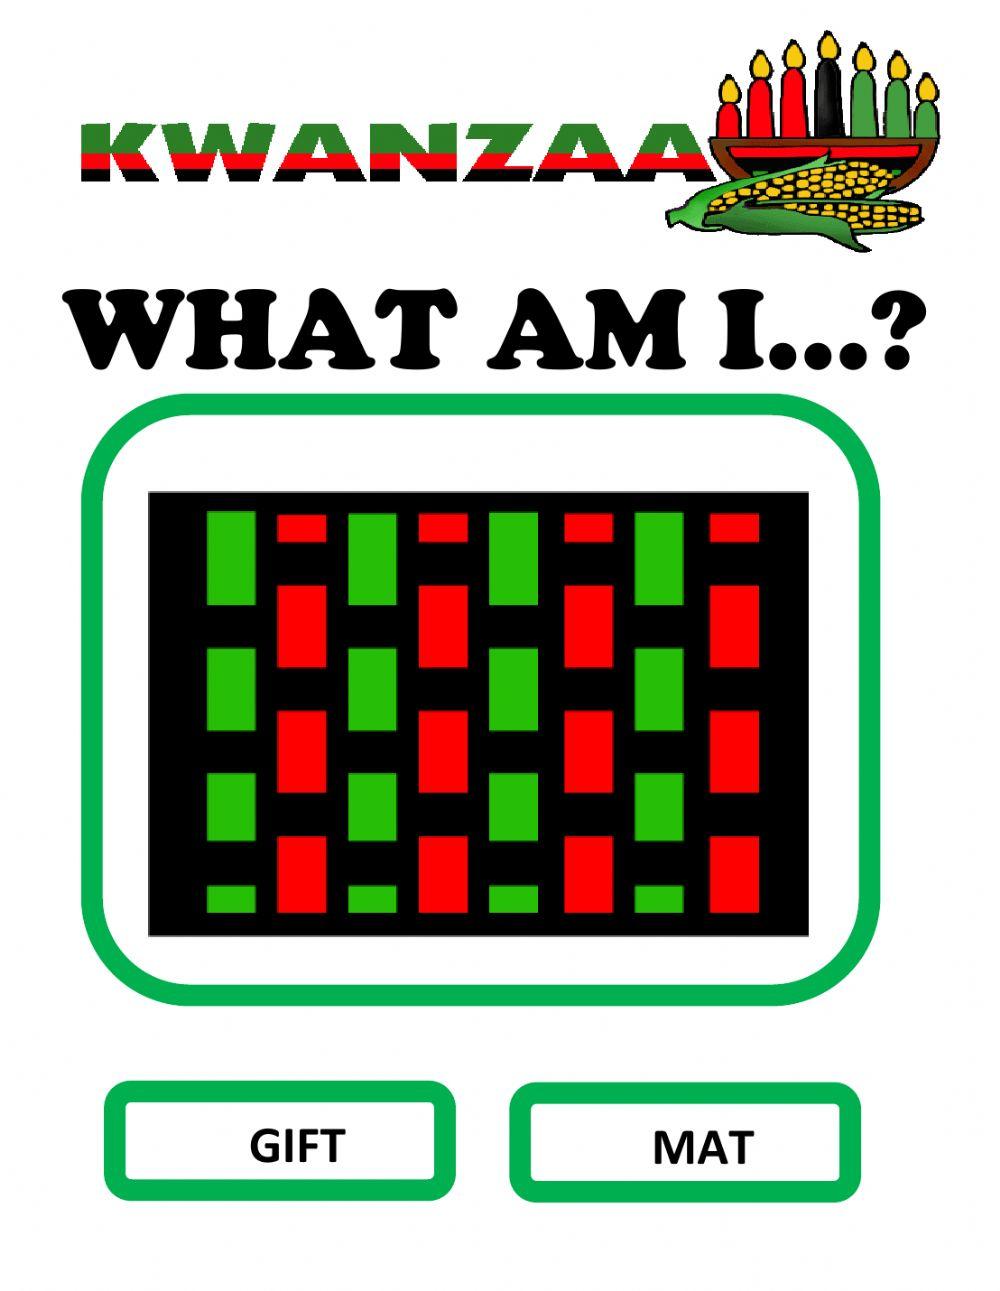 Kwanzaa - What Am I? Who Are We?